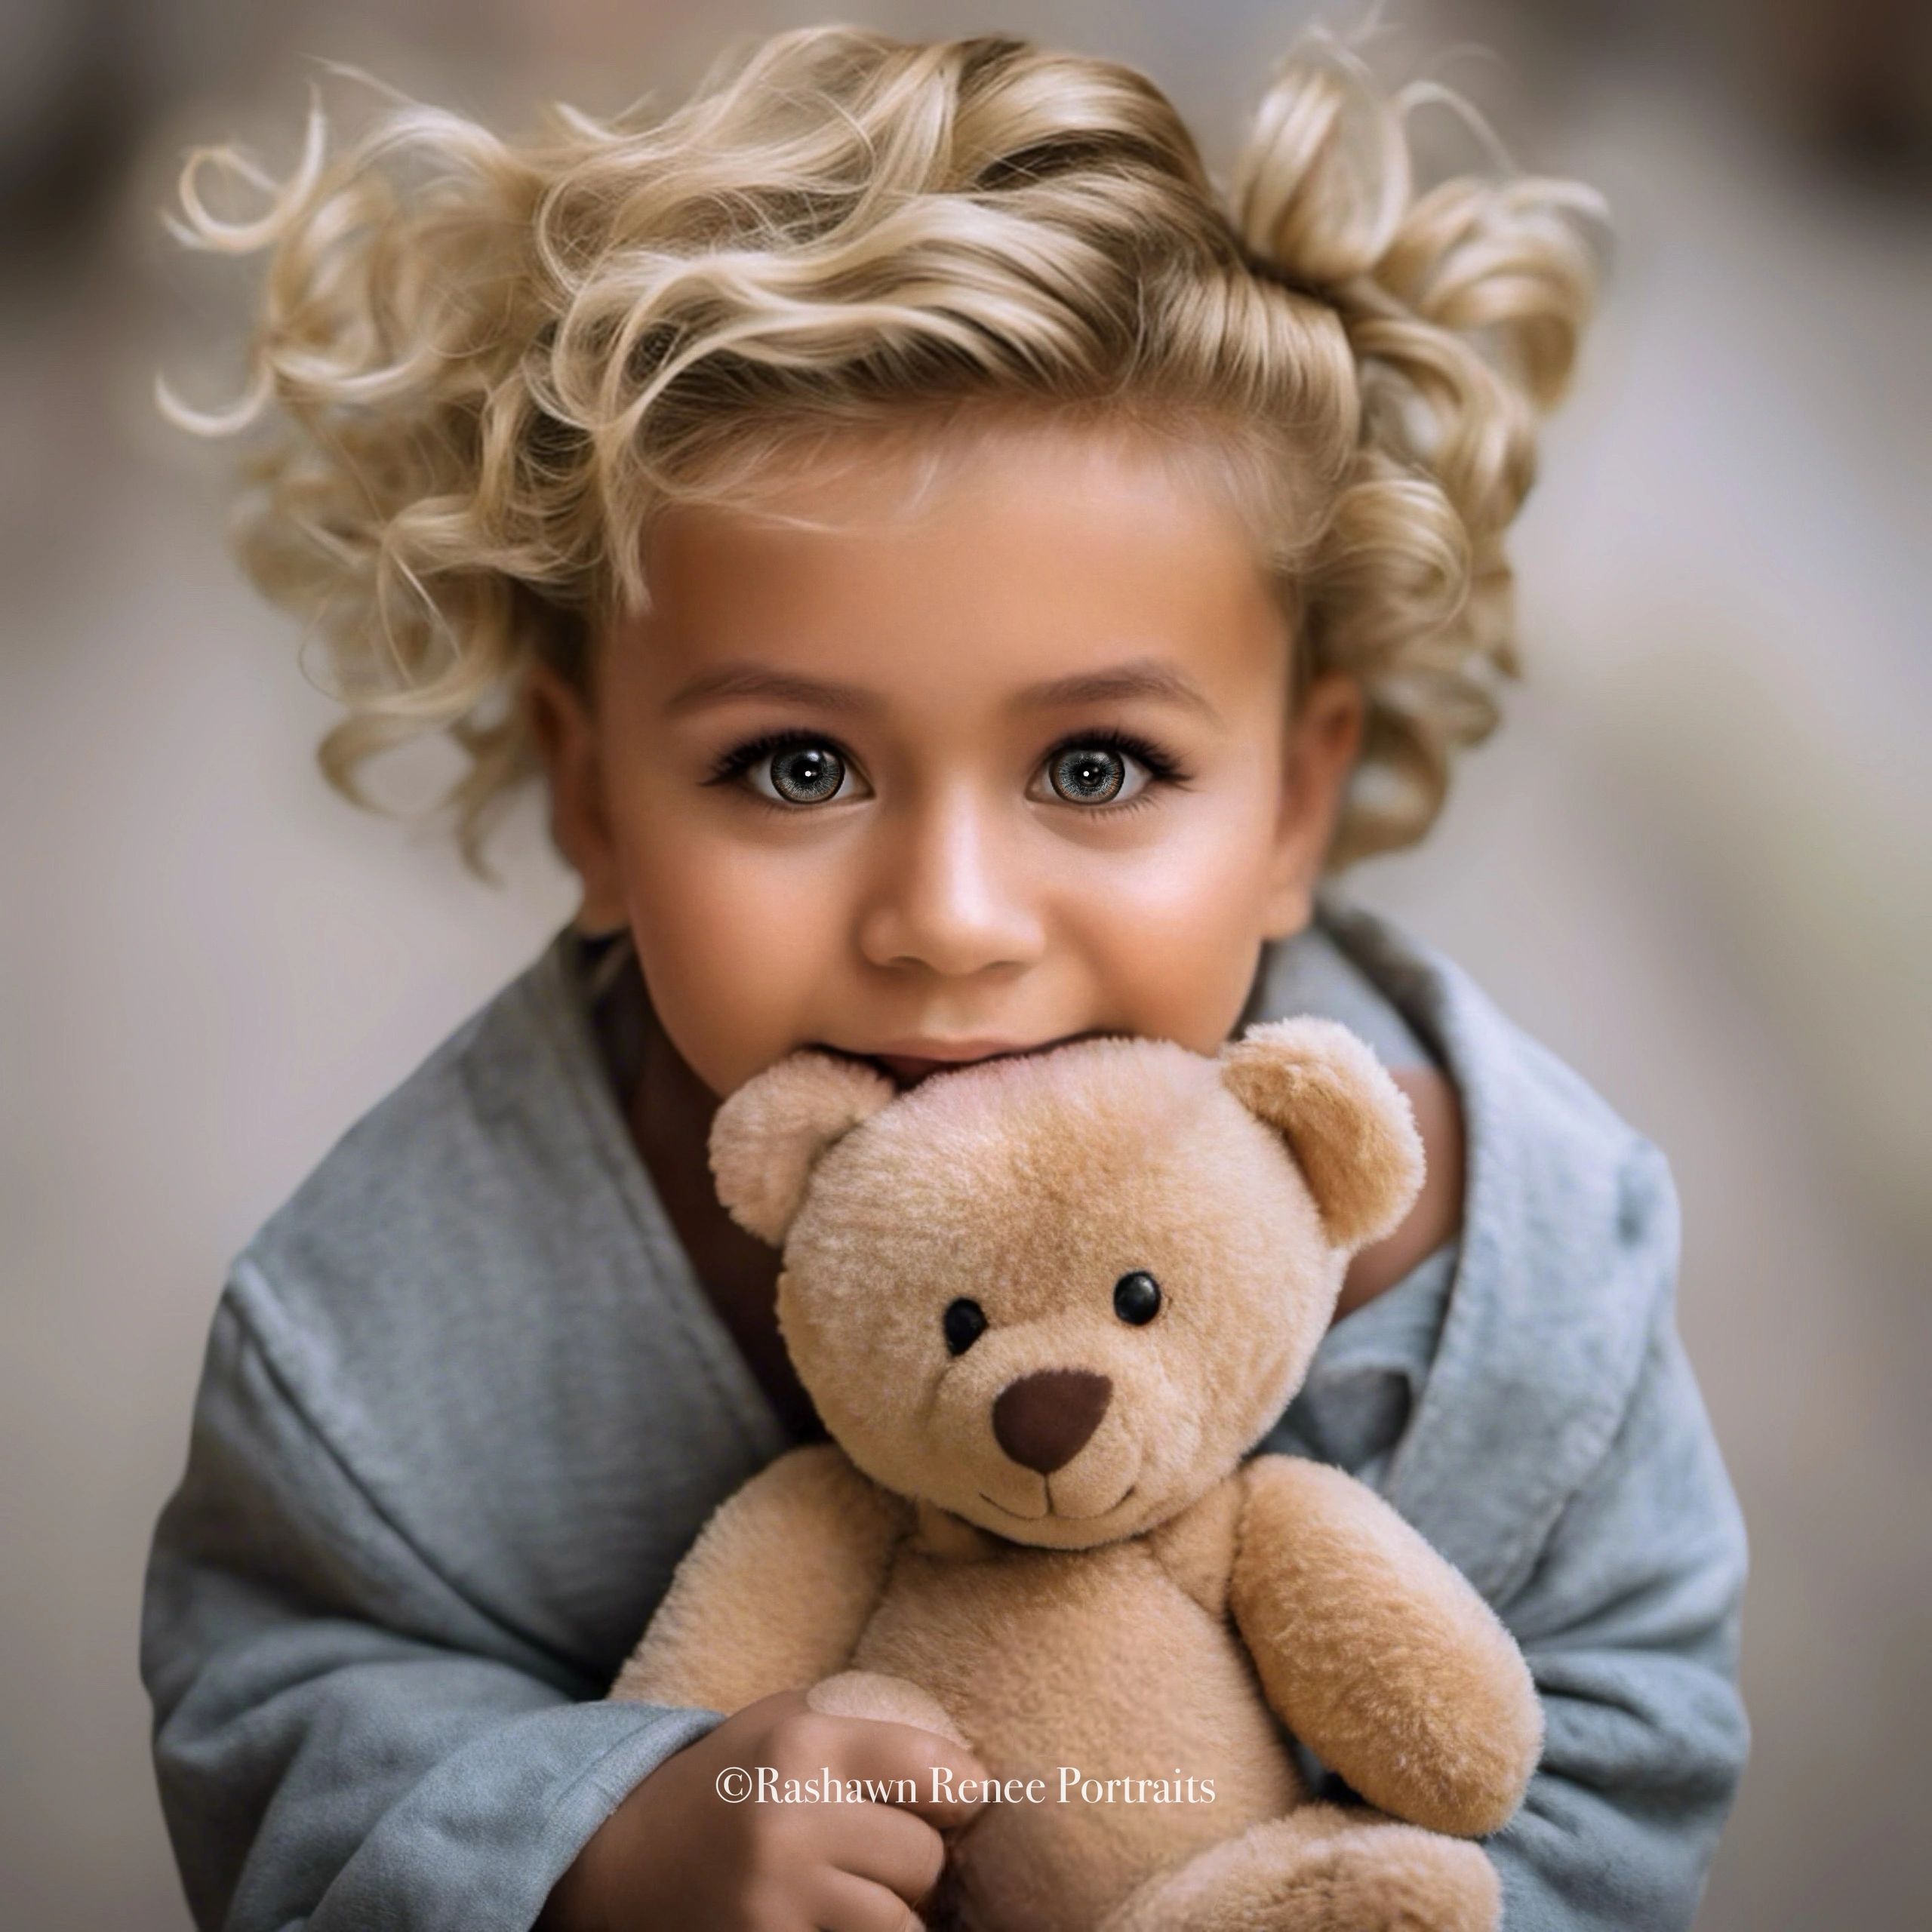 This is a portrait of a young child with captivating blue eyes and curly blonde hair. The child is h